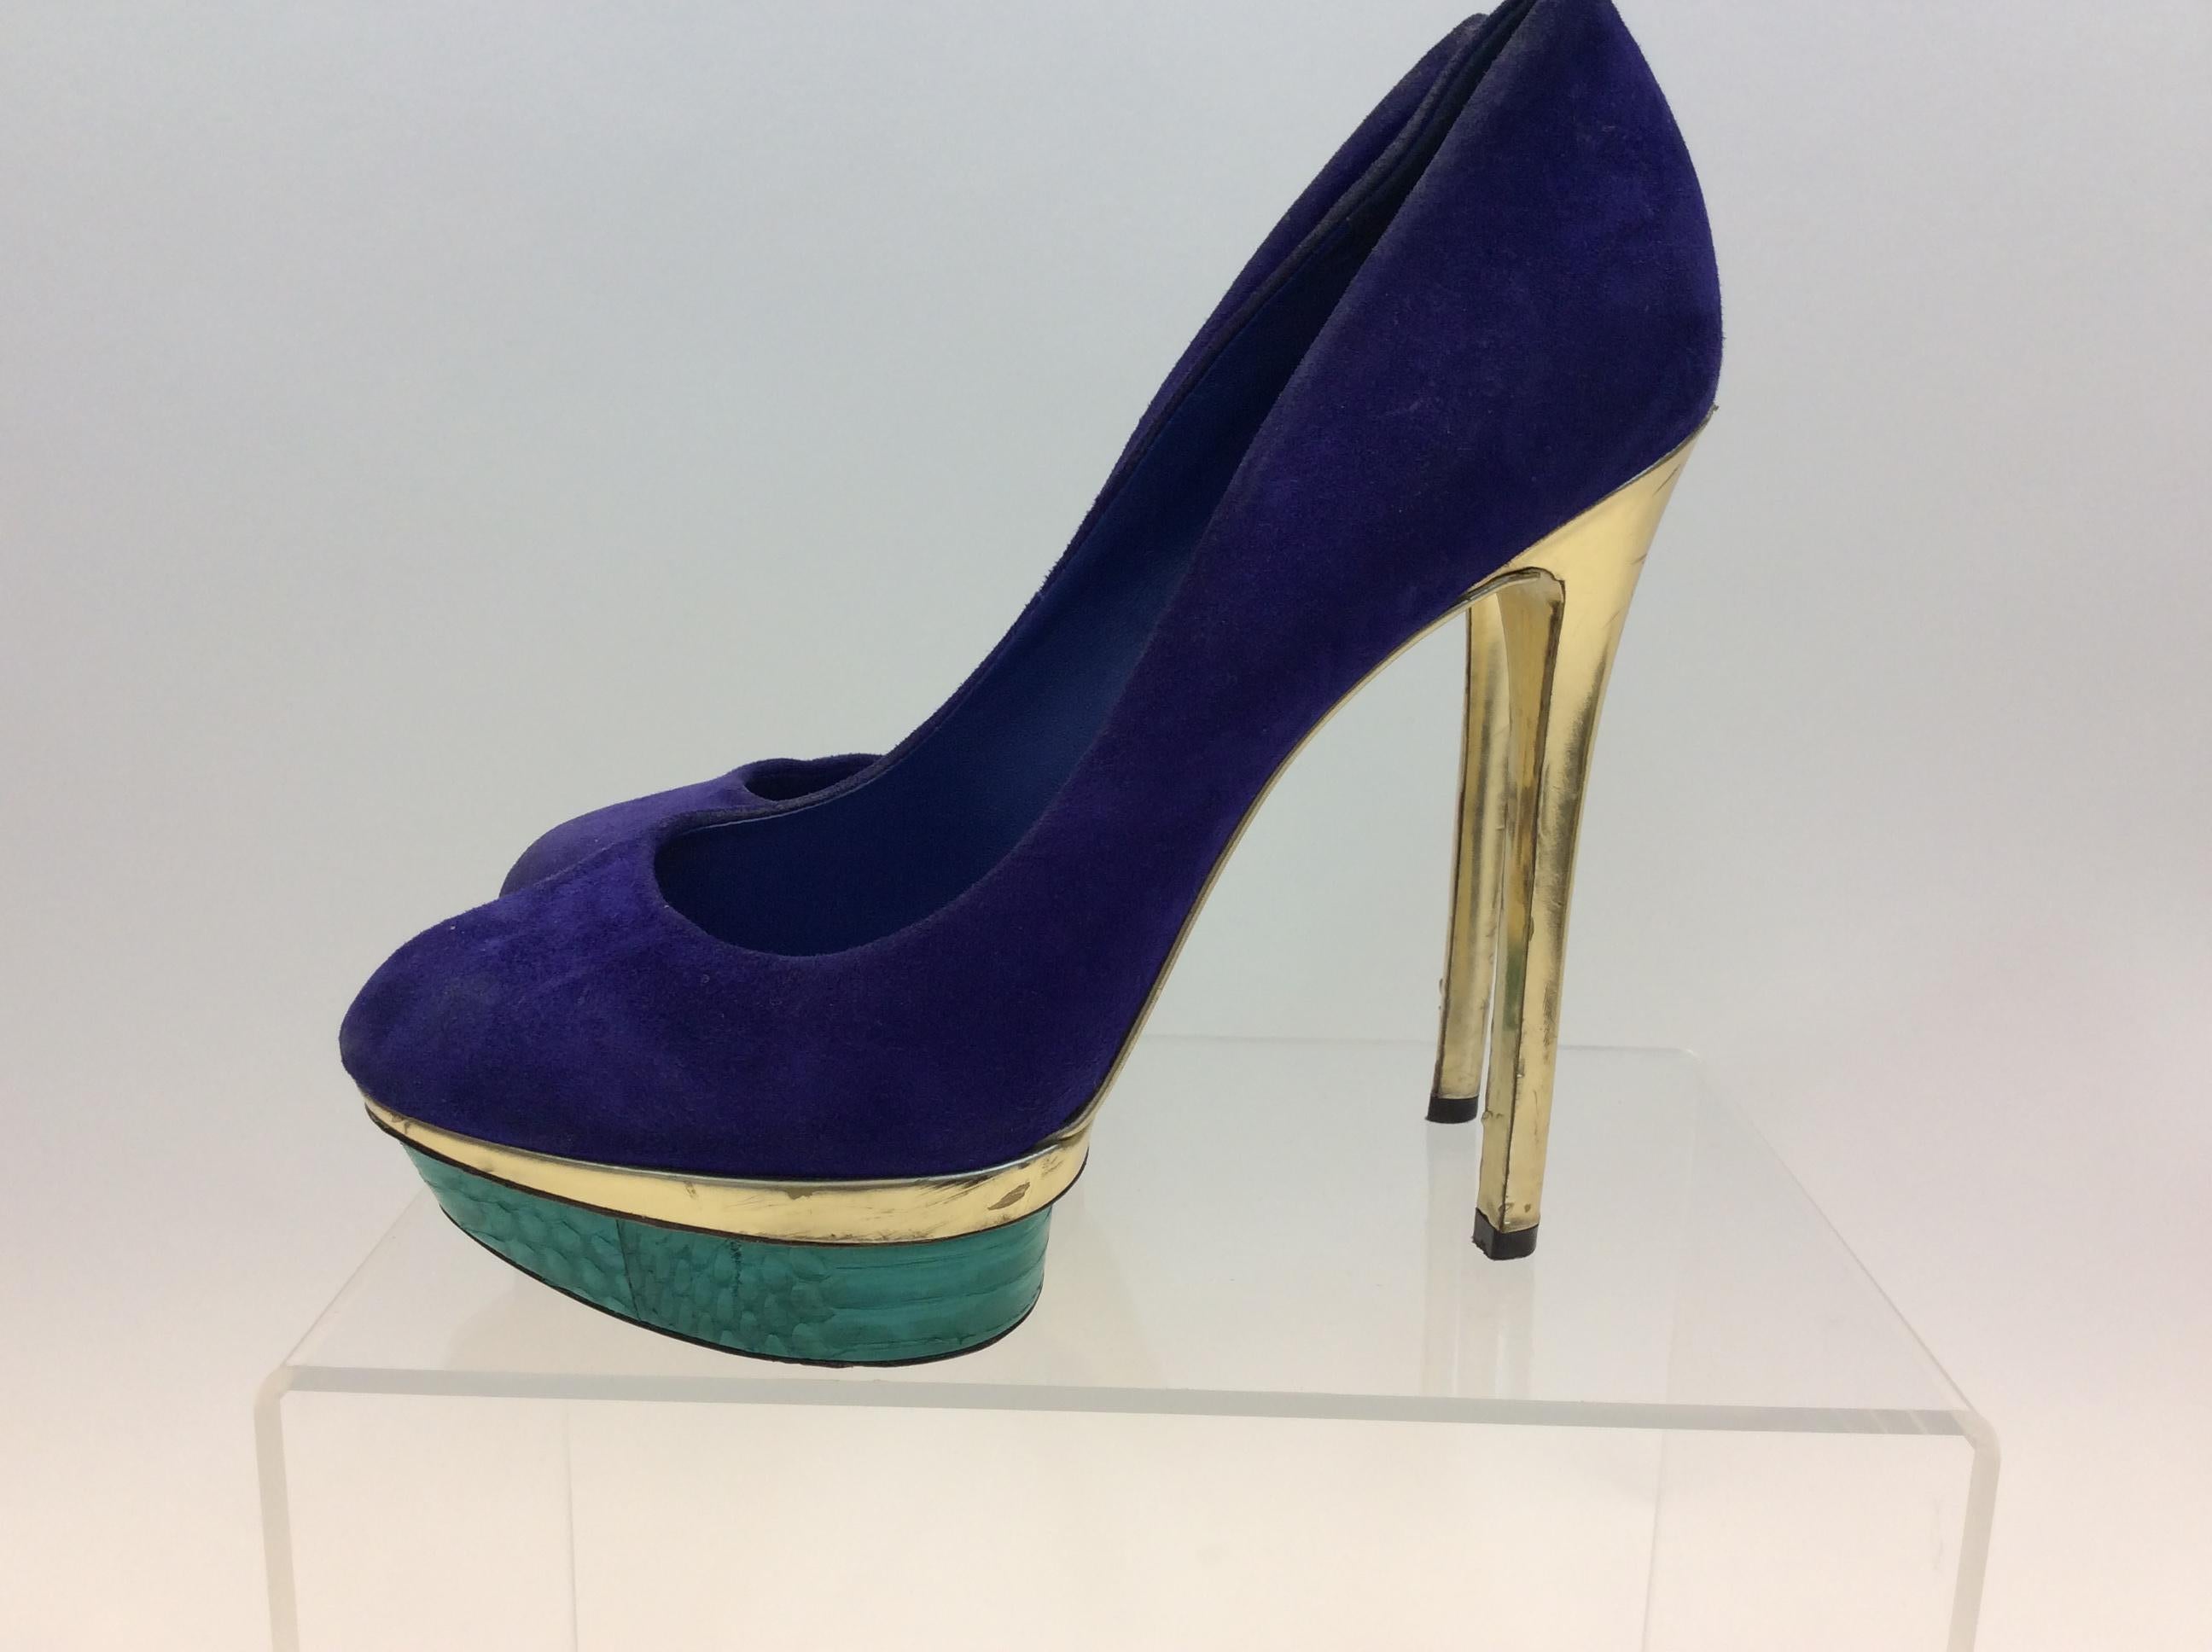 Brian Atwood Multi-Colored Suede Heels
$168
Size 7.5
Platform 1”
Heel 5.5”
